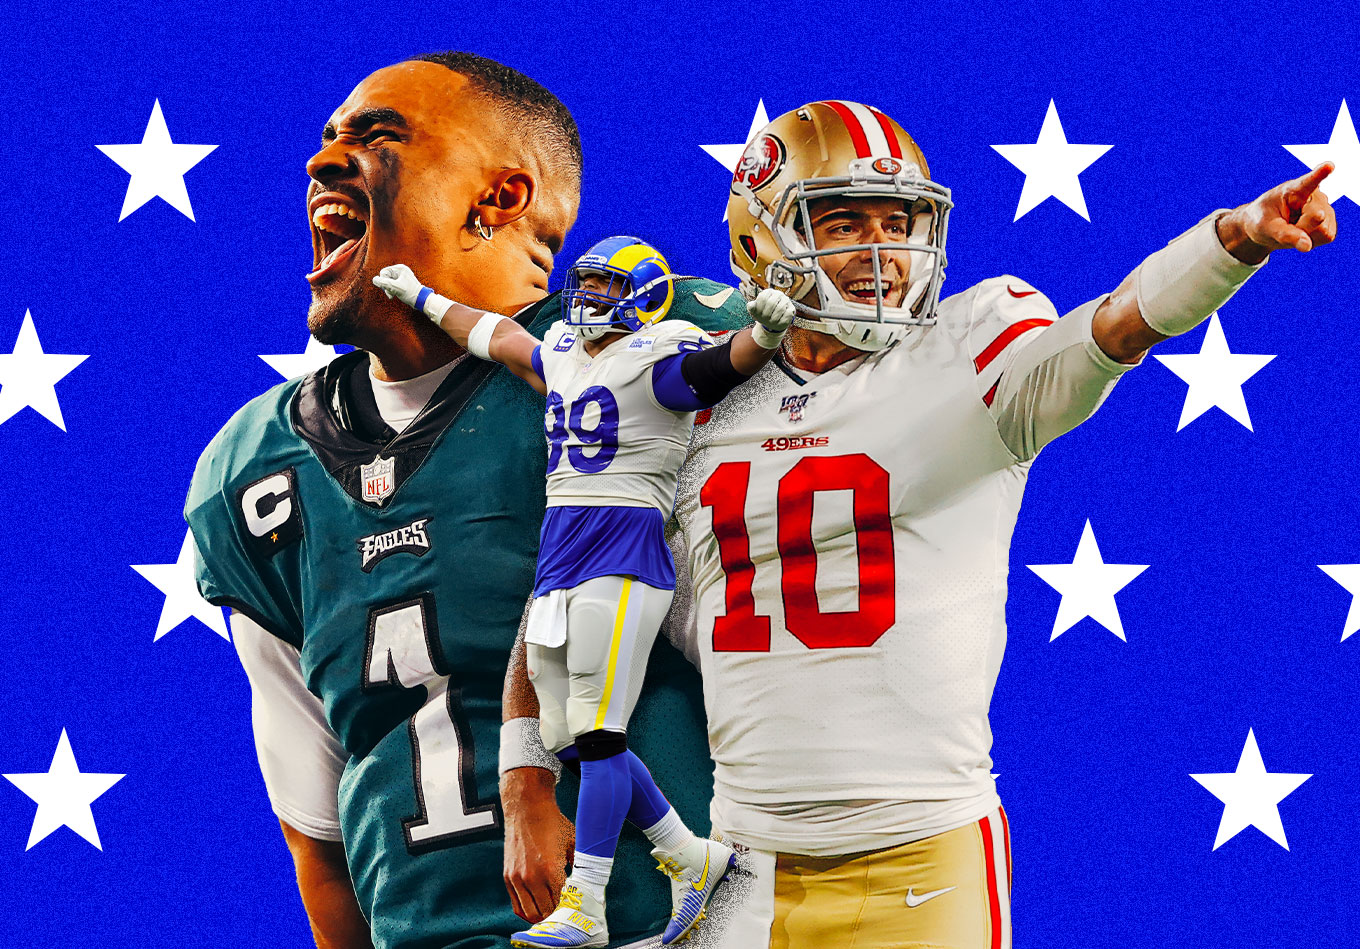 The Key NFC Matchups to Watch During Super Wild Card Weekend